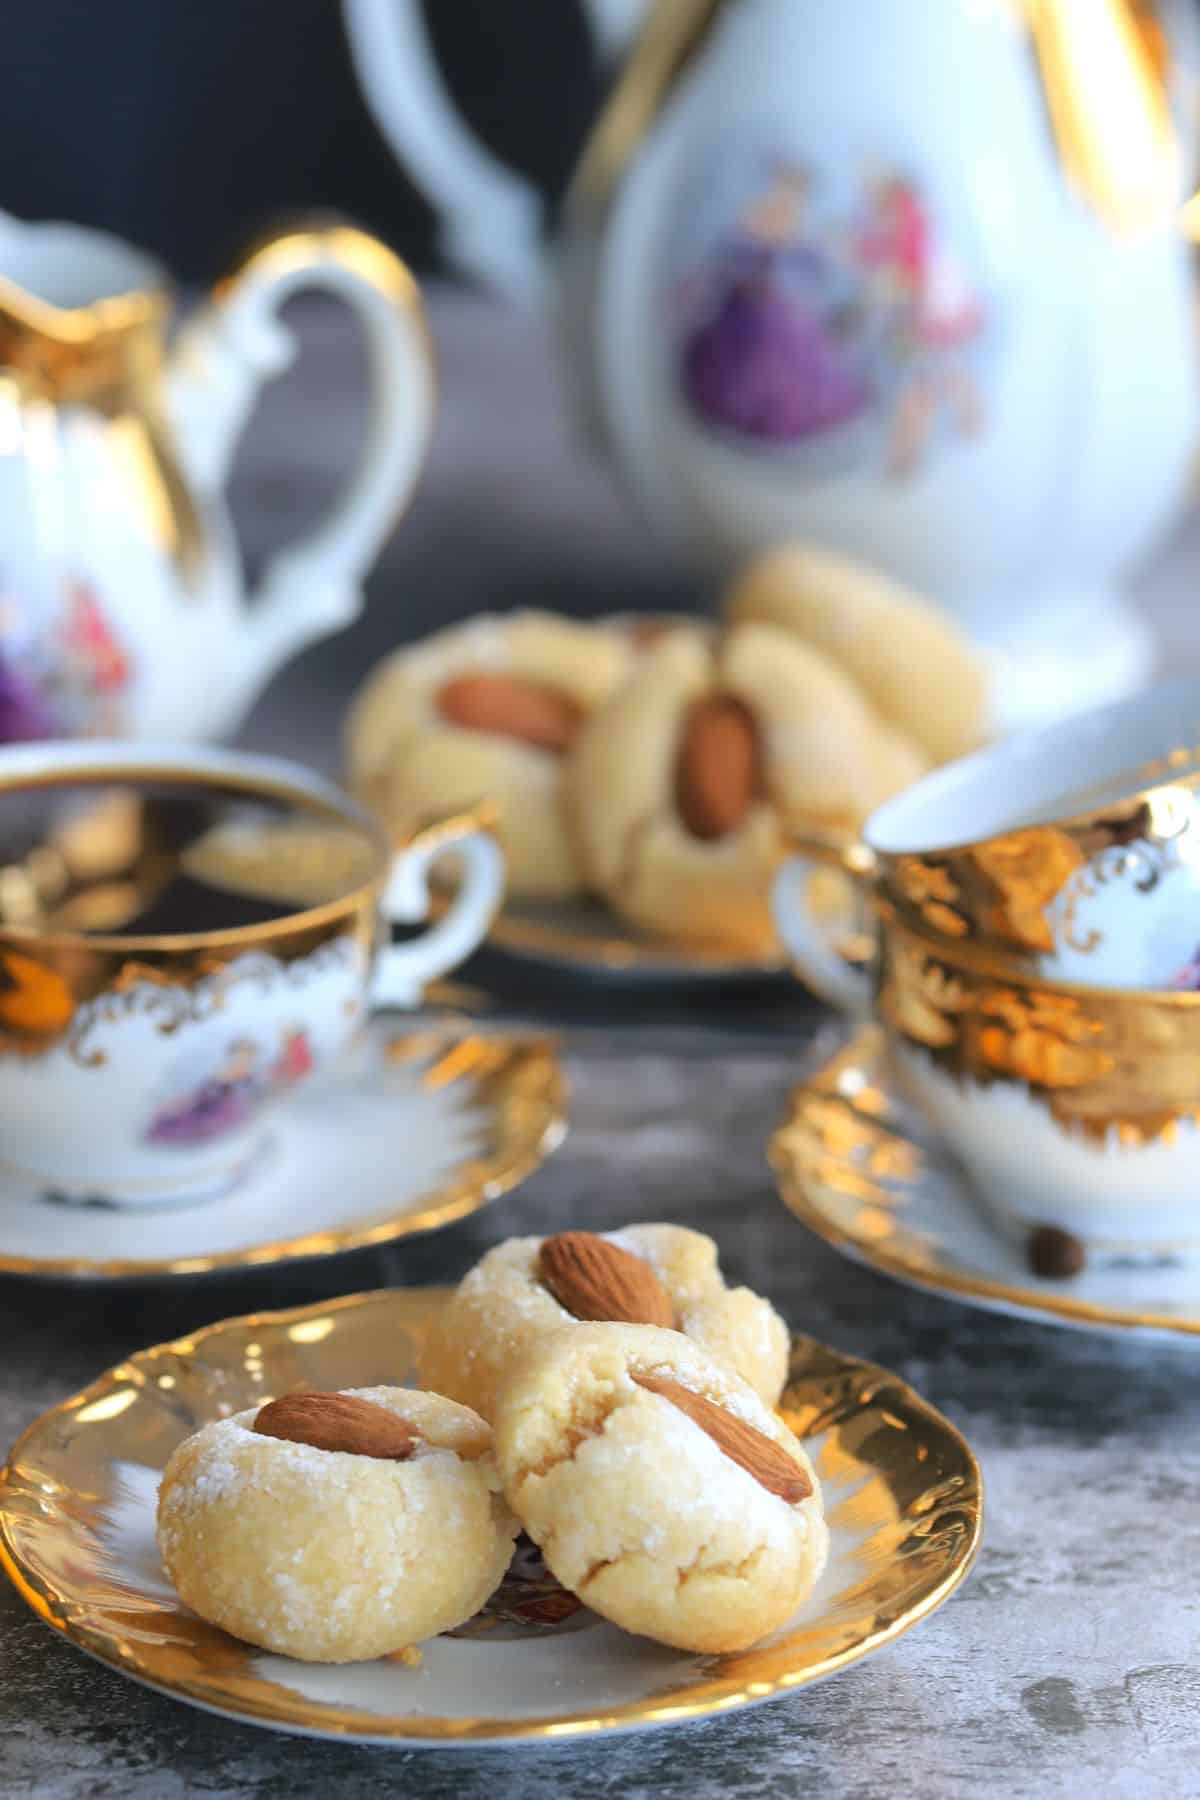 sicilian almond cookies on a gold rimmed dish surrouneded by gold rim tea cups and sets.